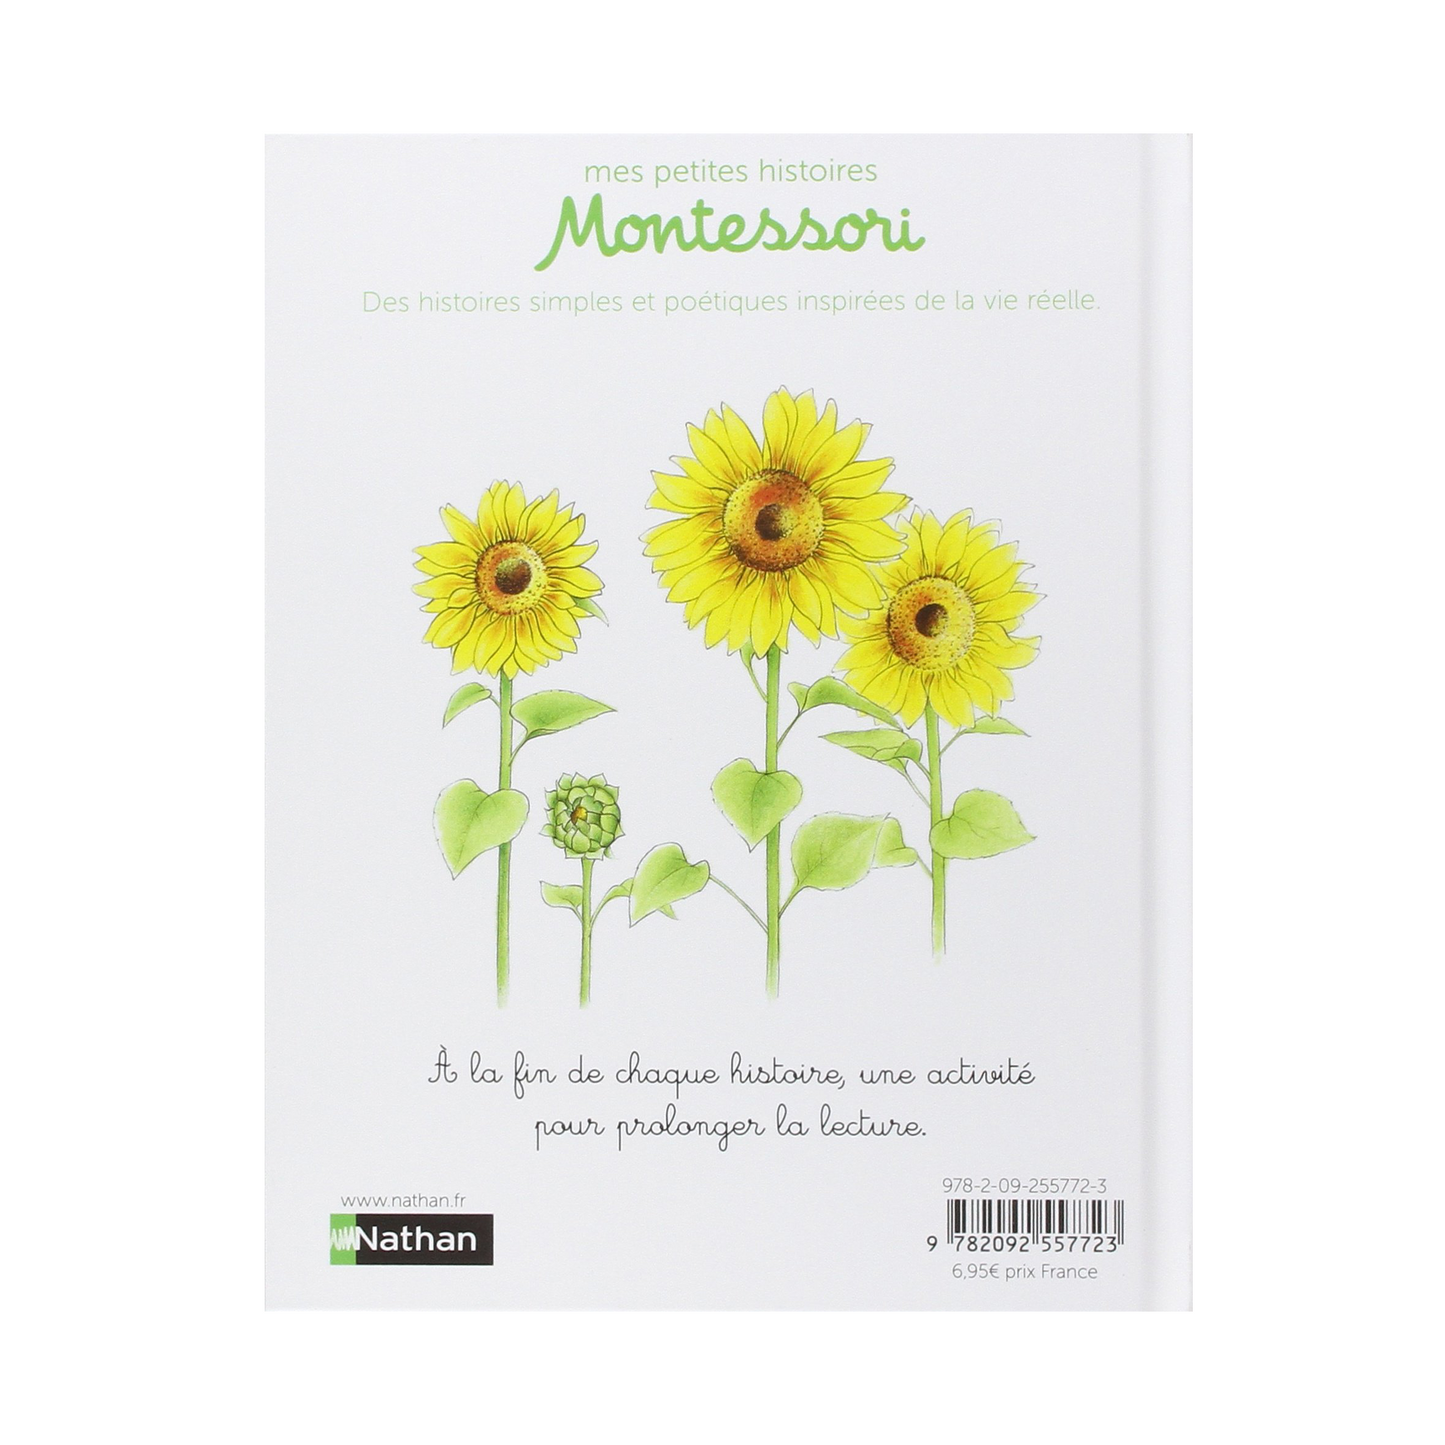 Emy and the sunflowers - A short Montessori pedagogy story - Nathan